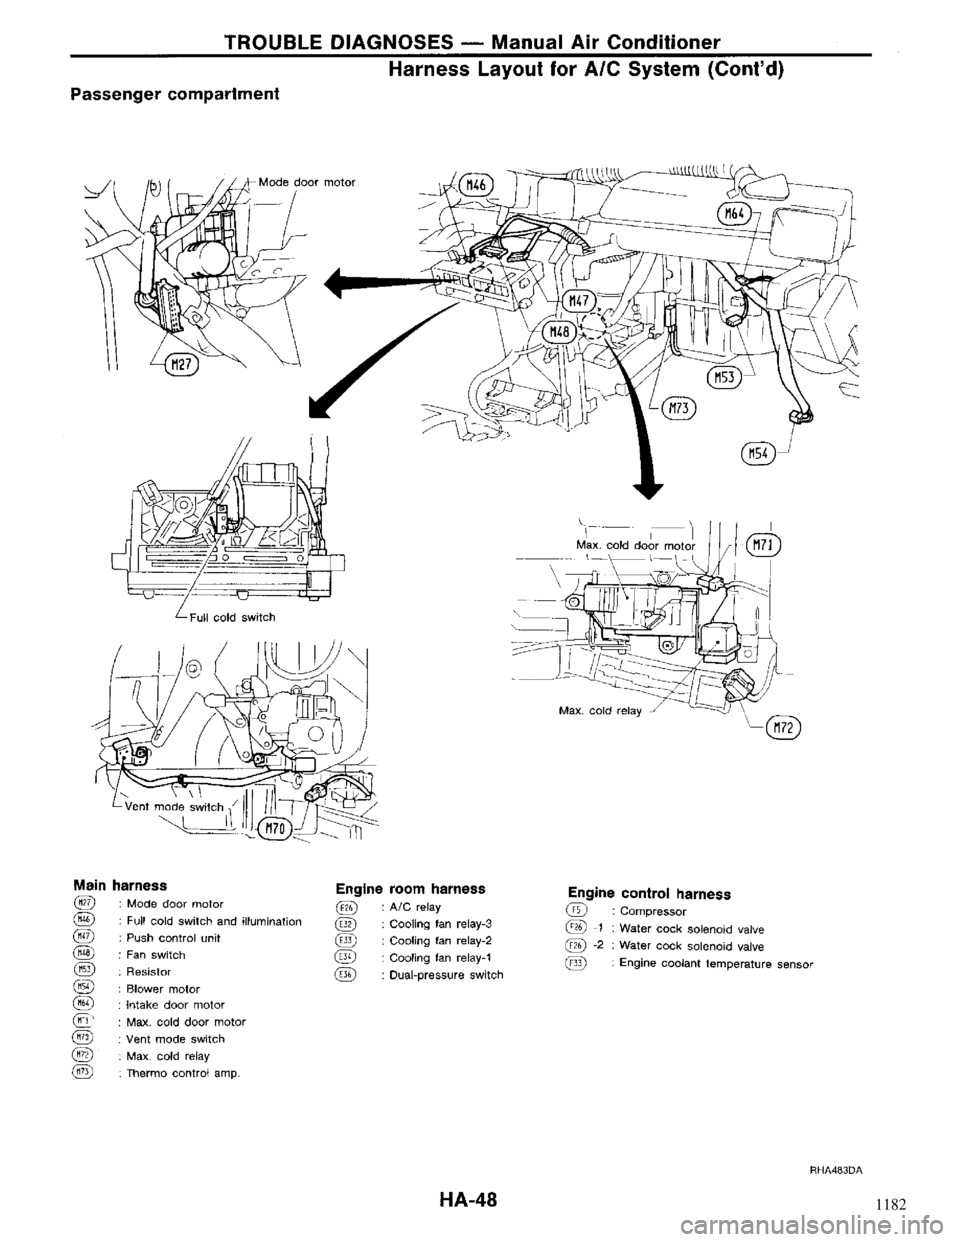 NISSAN MAXIMA 1994 A32 / 4.G Heather And Air Conditioner Service Manual 1182 